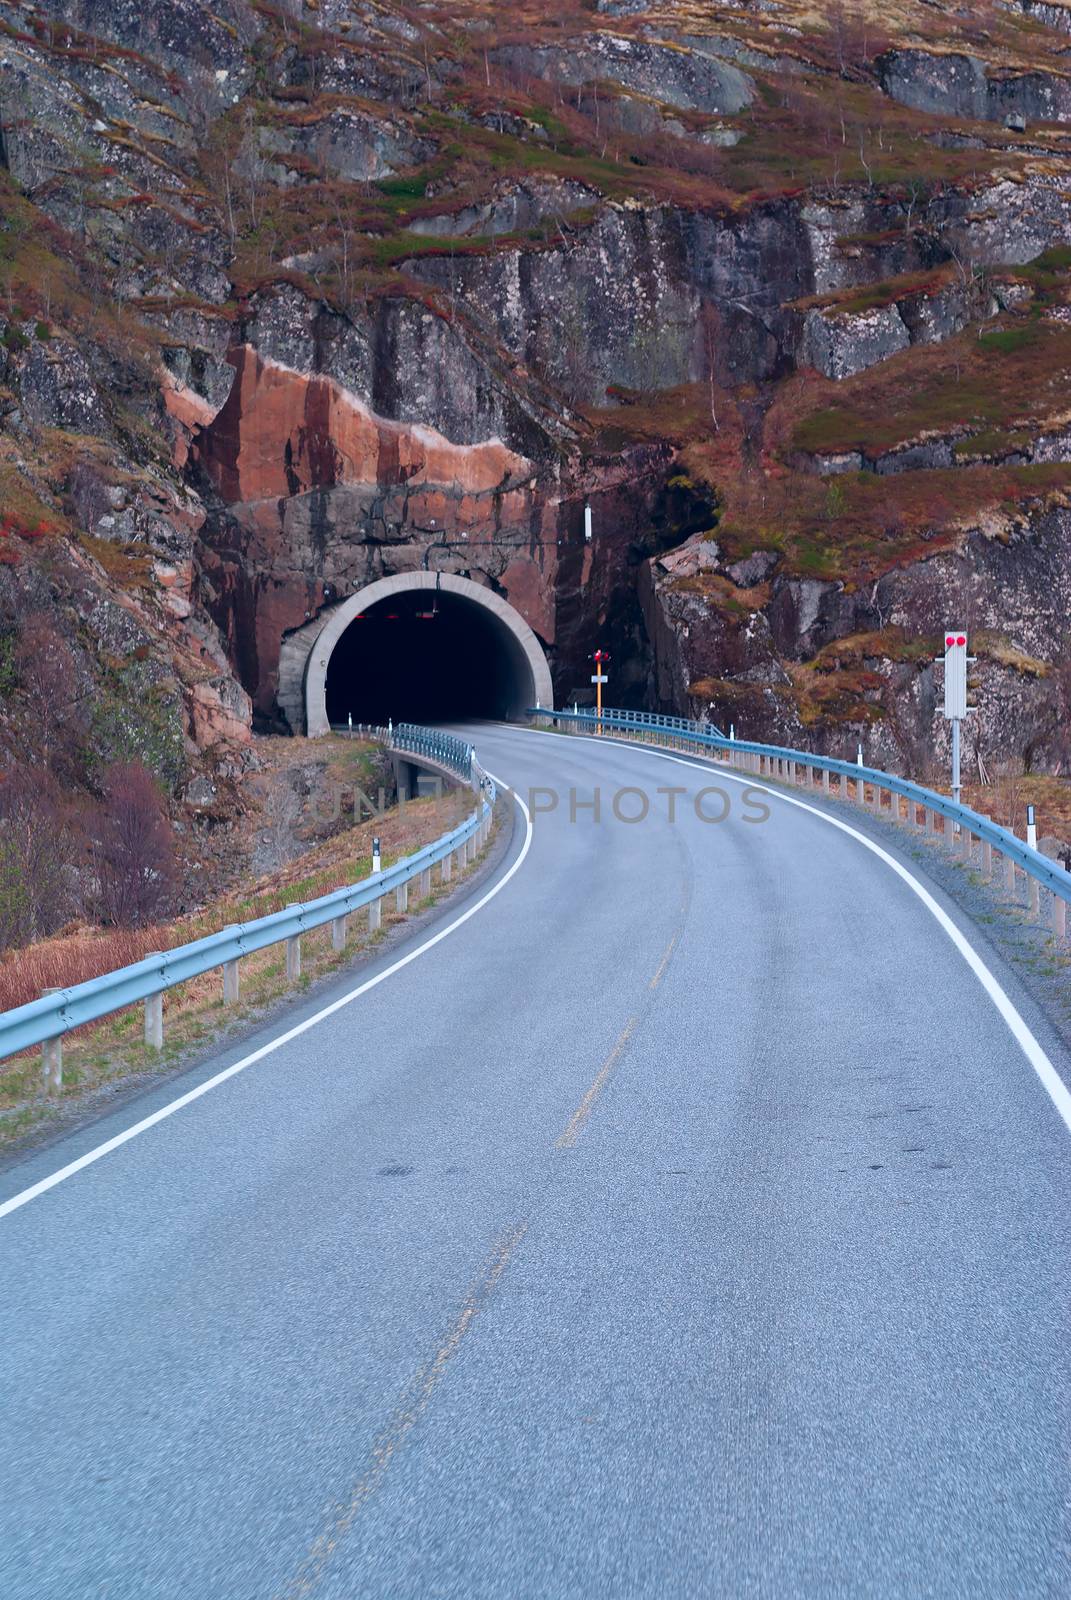 Tunnel on the norwegian mountain road by BIG_TAU